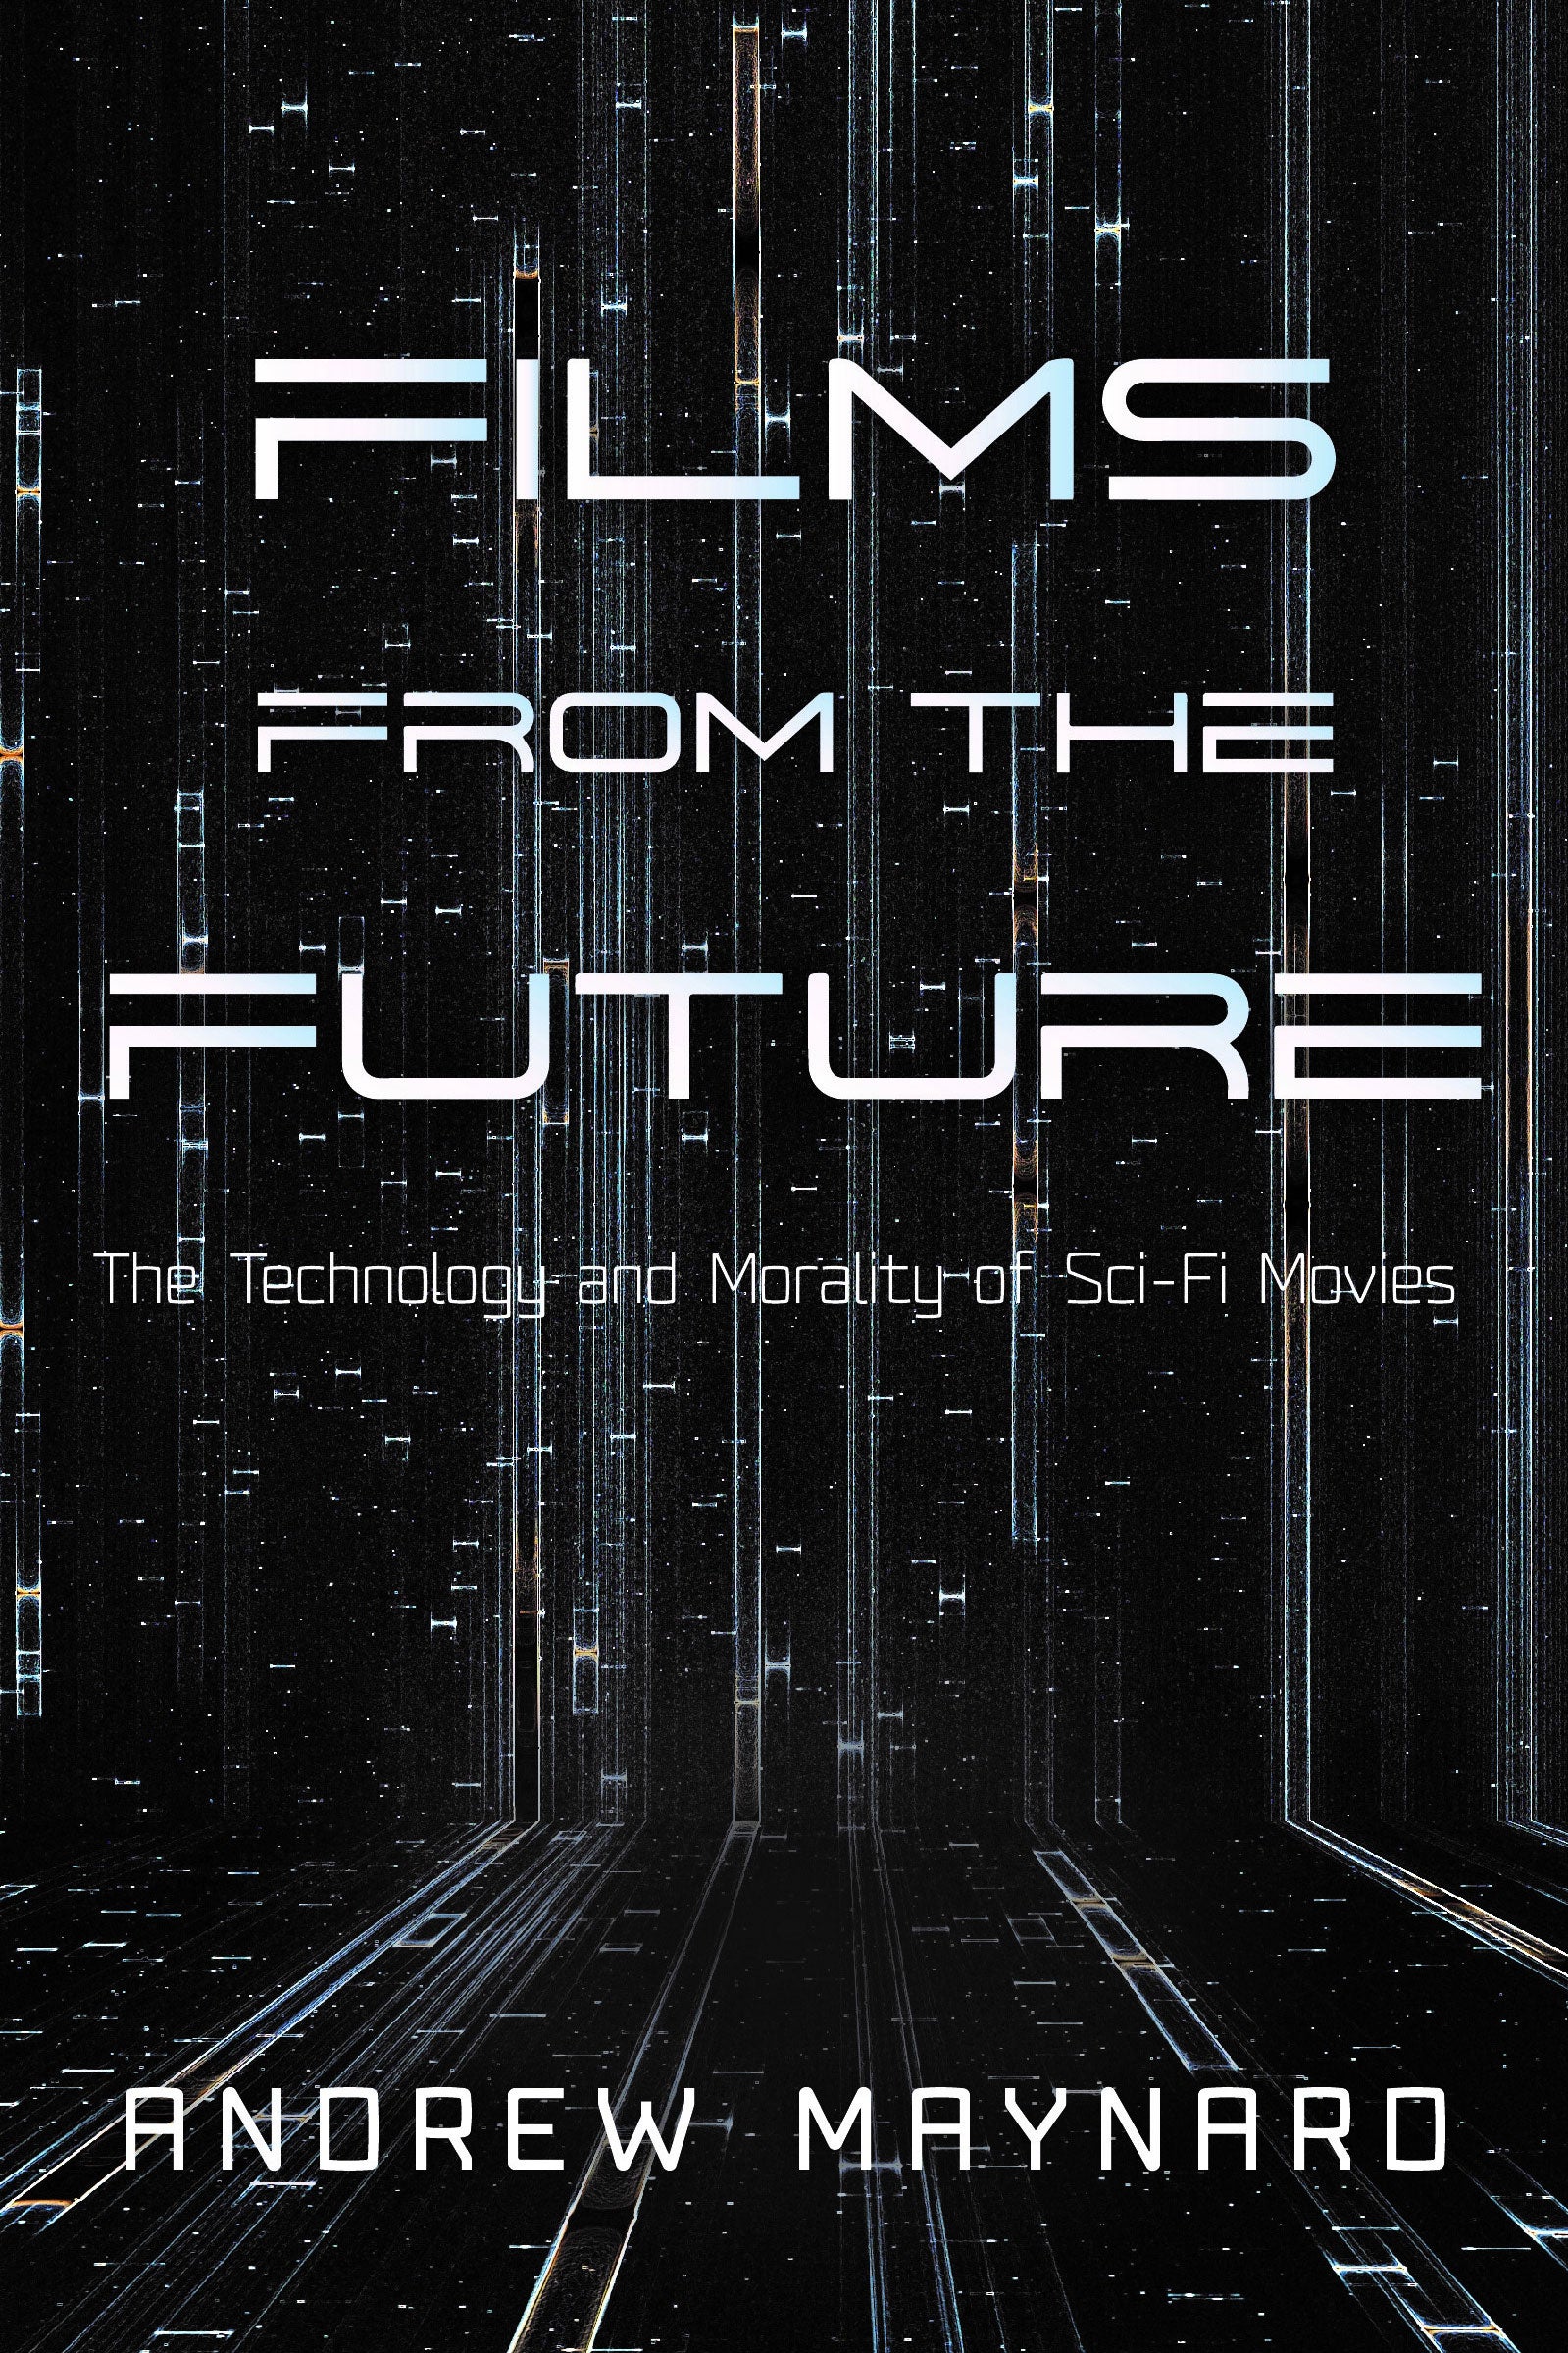 Book cover of Films From the Future: The Technology and Morality of Sci-Fi Movies.